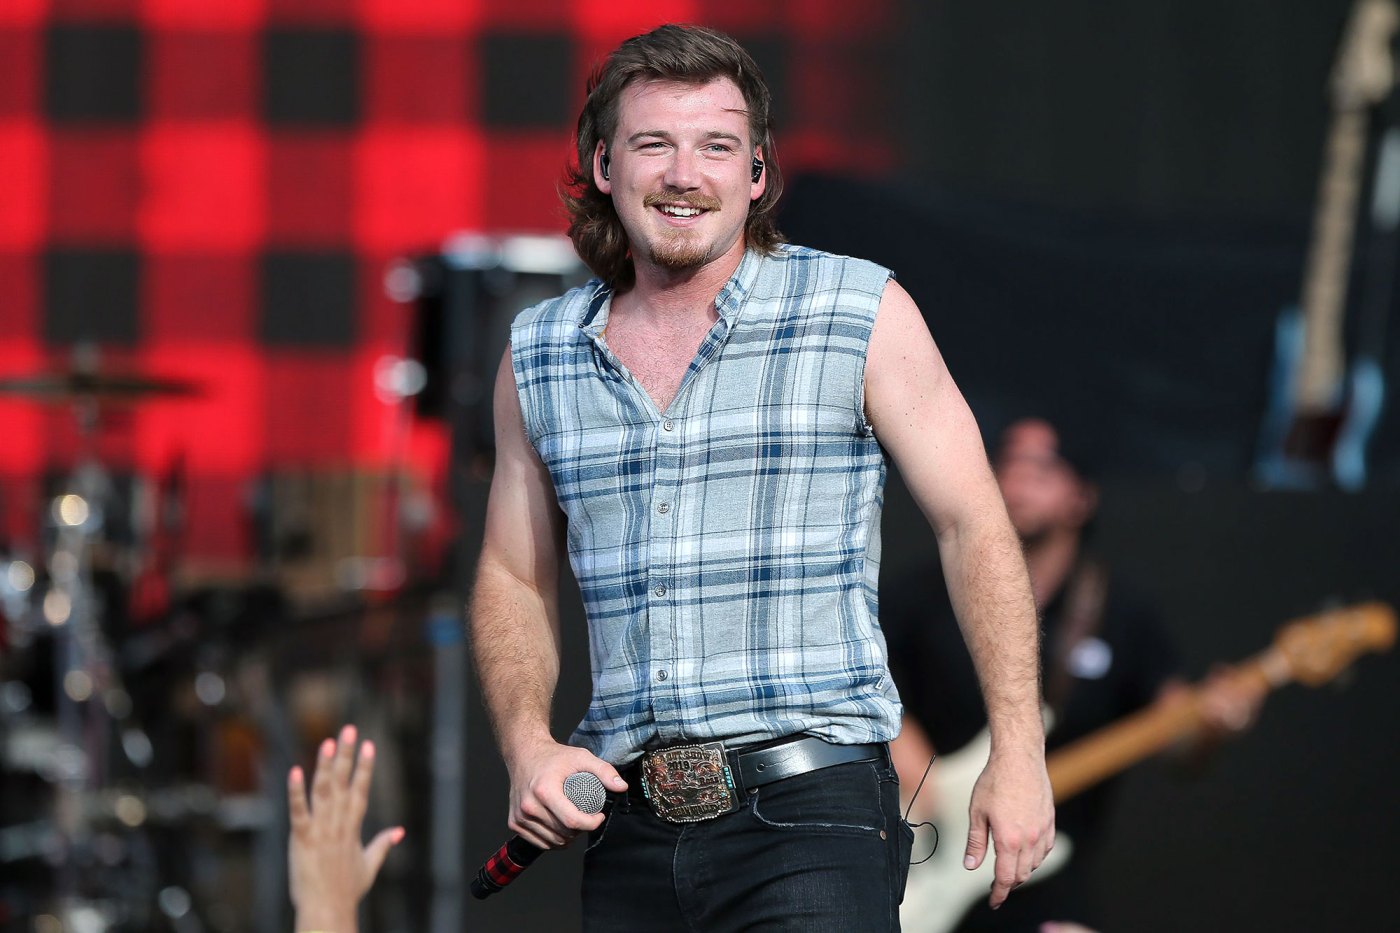 Morgan Wallen Has Postponed the Start Of “The Dangerous Tour” Due to “Severe and Inclement Weather”